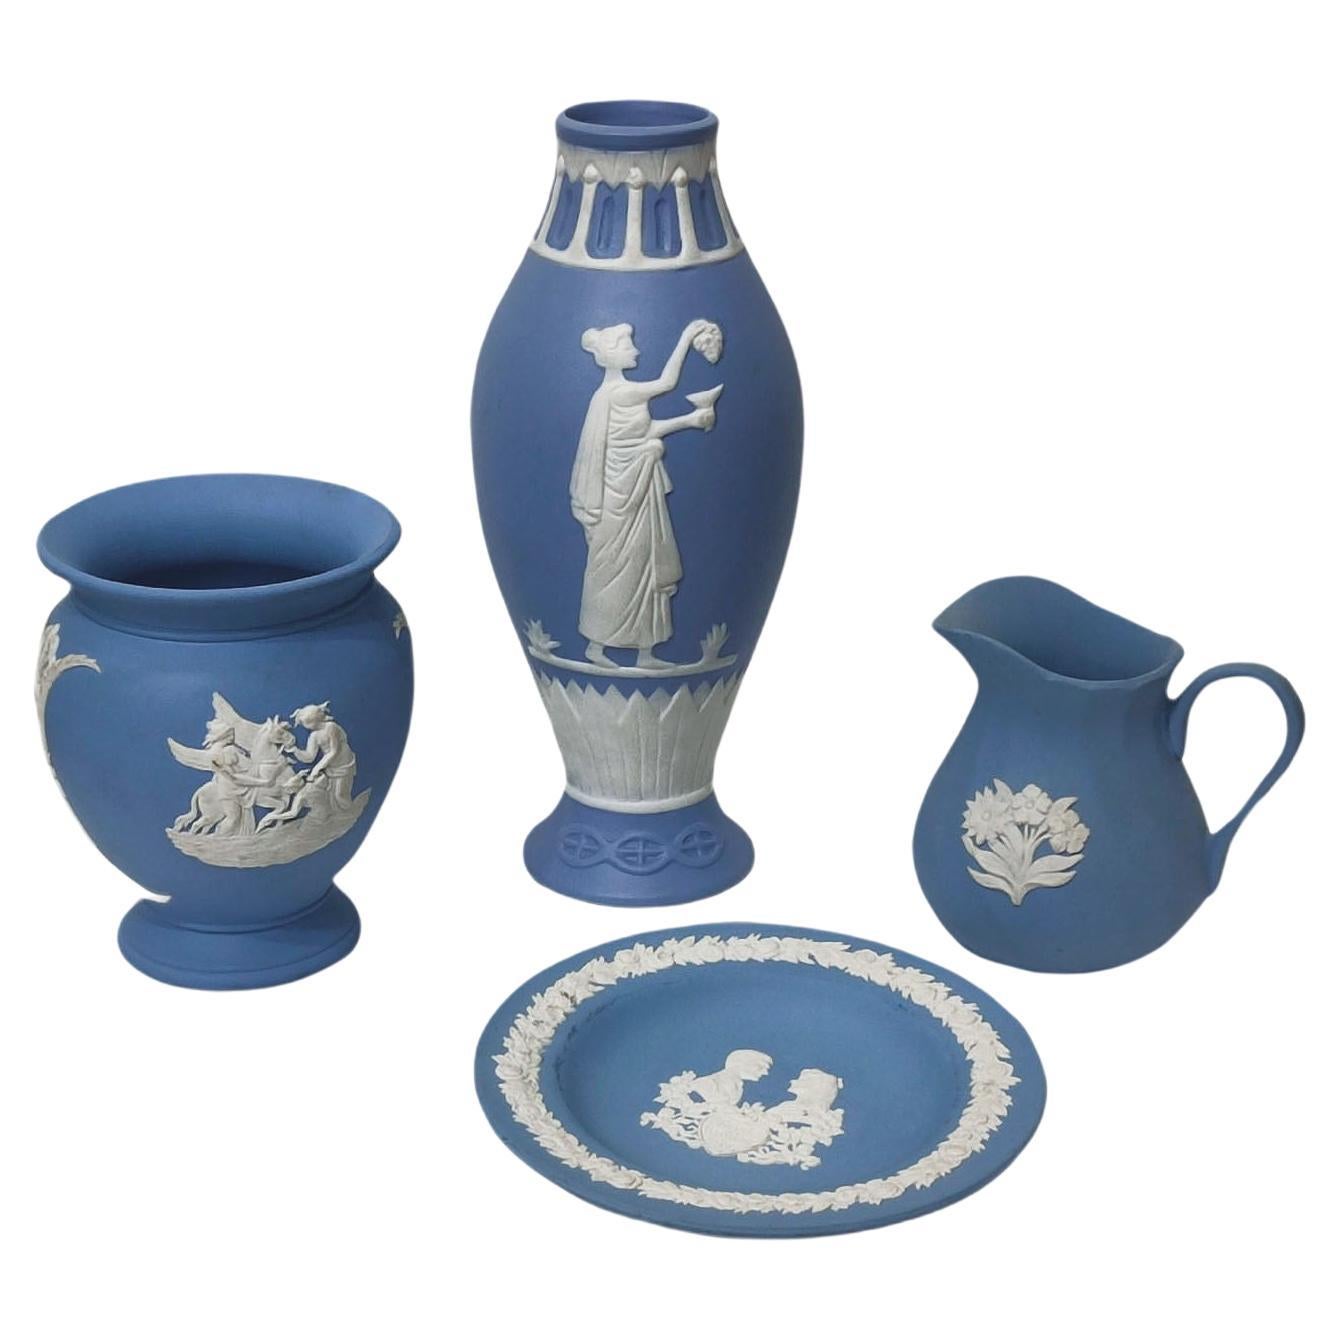 Wedgwood Blue Jasper Ware Vessels Classical Scenes, Collection of 4, FREESHIP For Sale